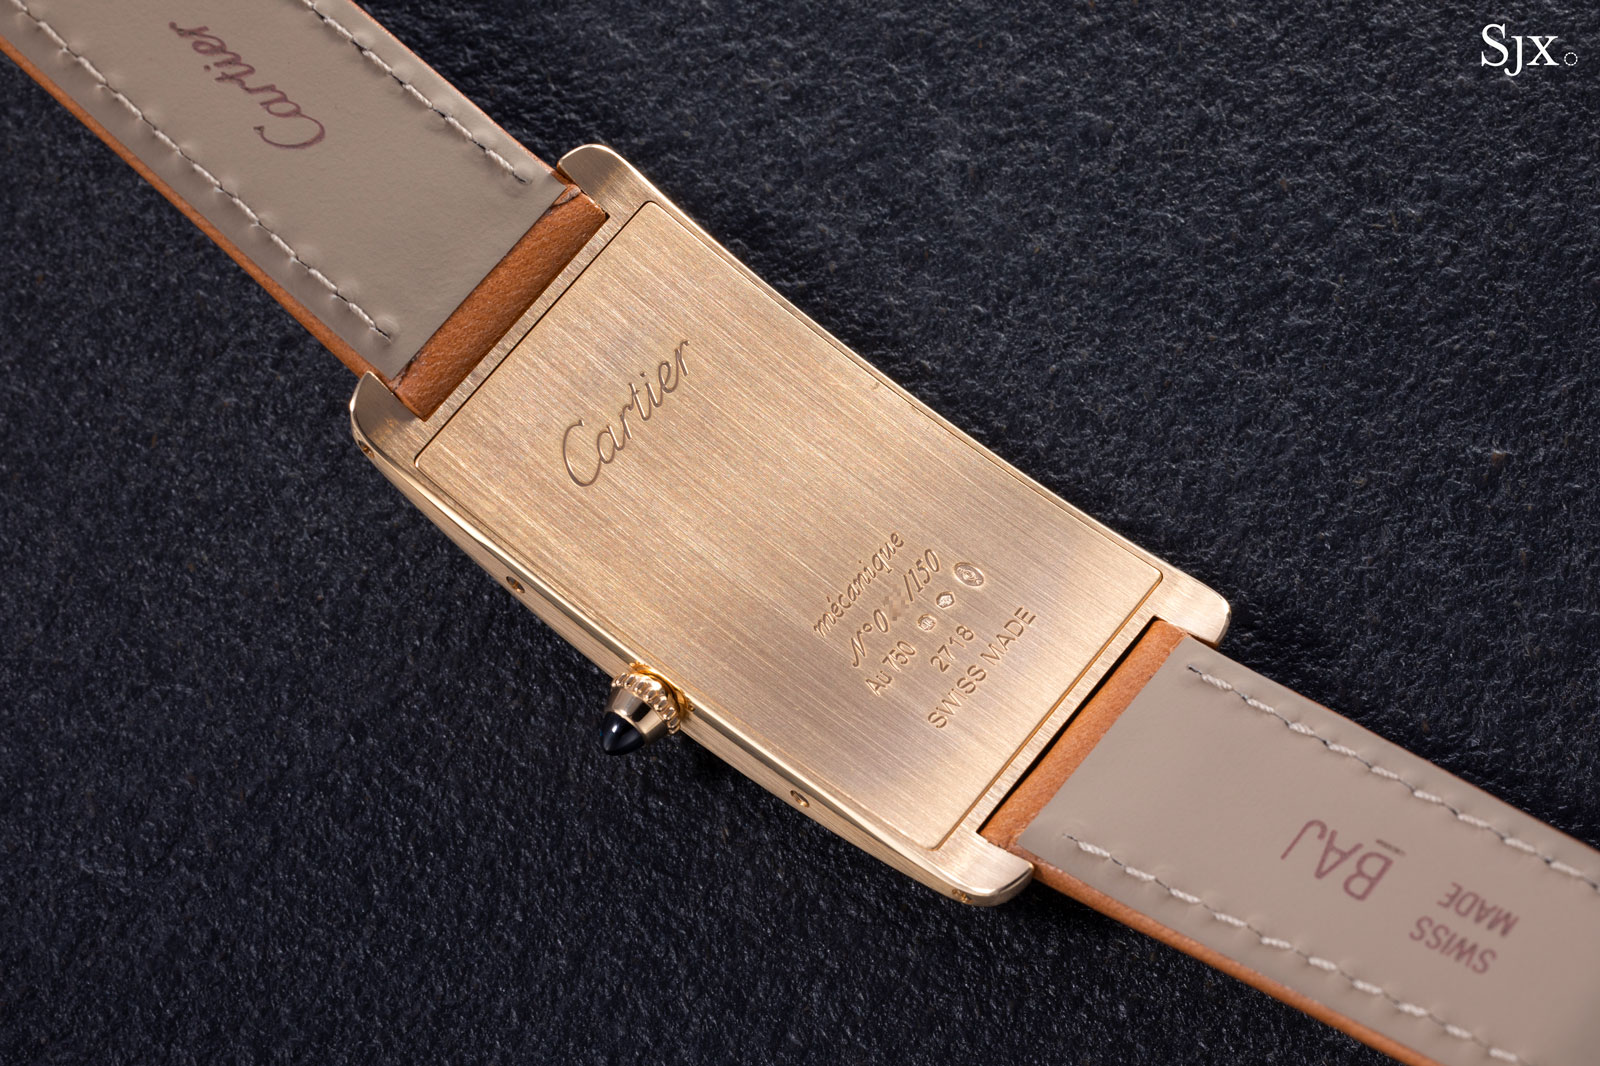 Introducing the Cartier Tank Louis Cartier 100th Anniversary (with